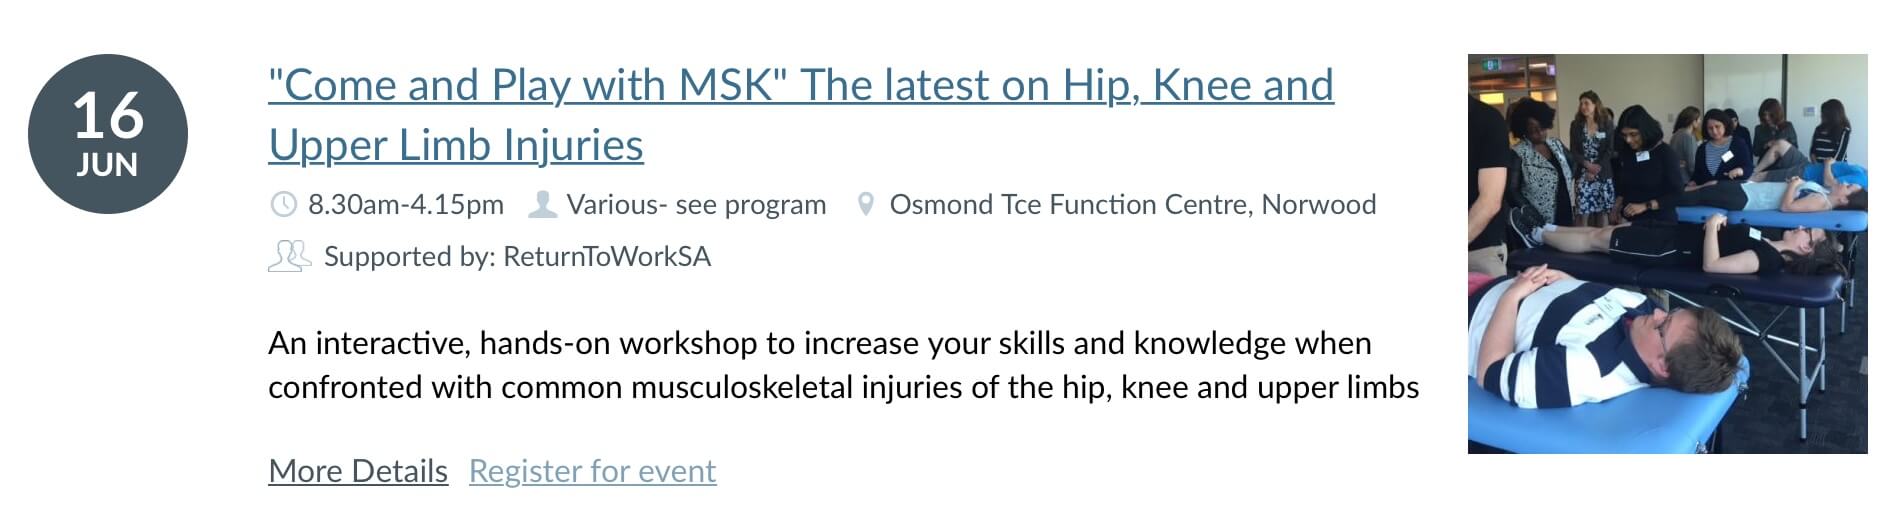 “Come and Play with MSK” An update on Hip, Knee and Upper Limb Injuries to be held this Saturday, 16 June 2018